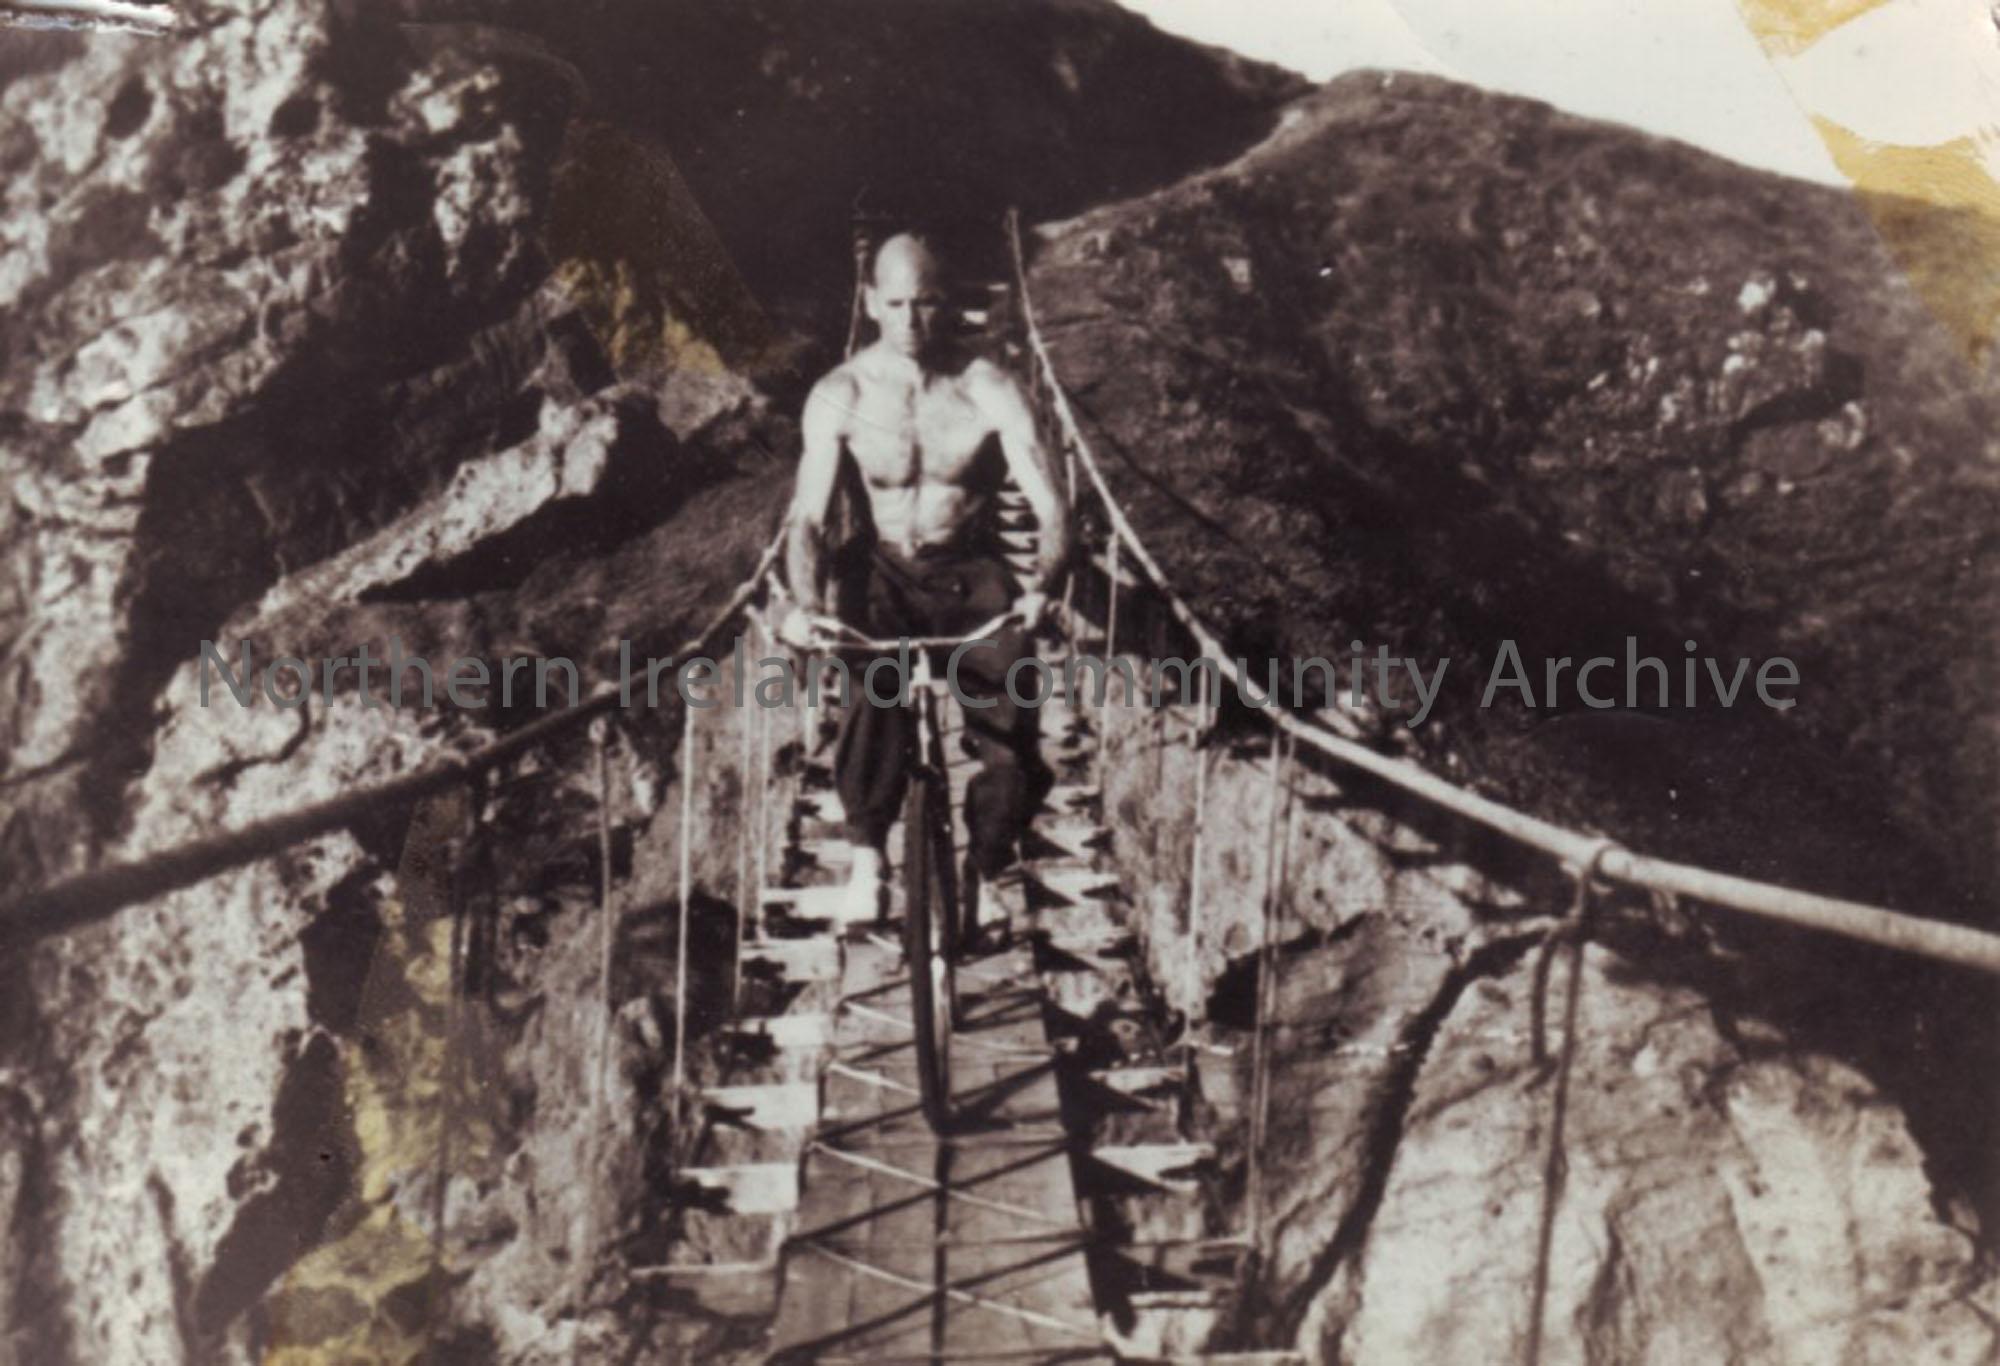 Leslie McCurdy, Athlete riding a bike across Carrick-a-Rede rope-bridge